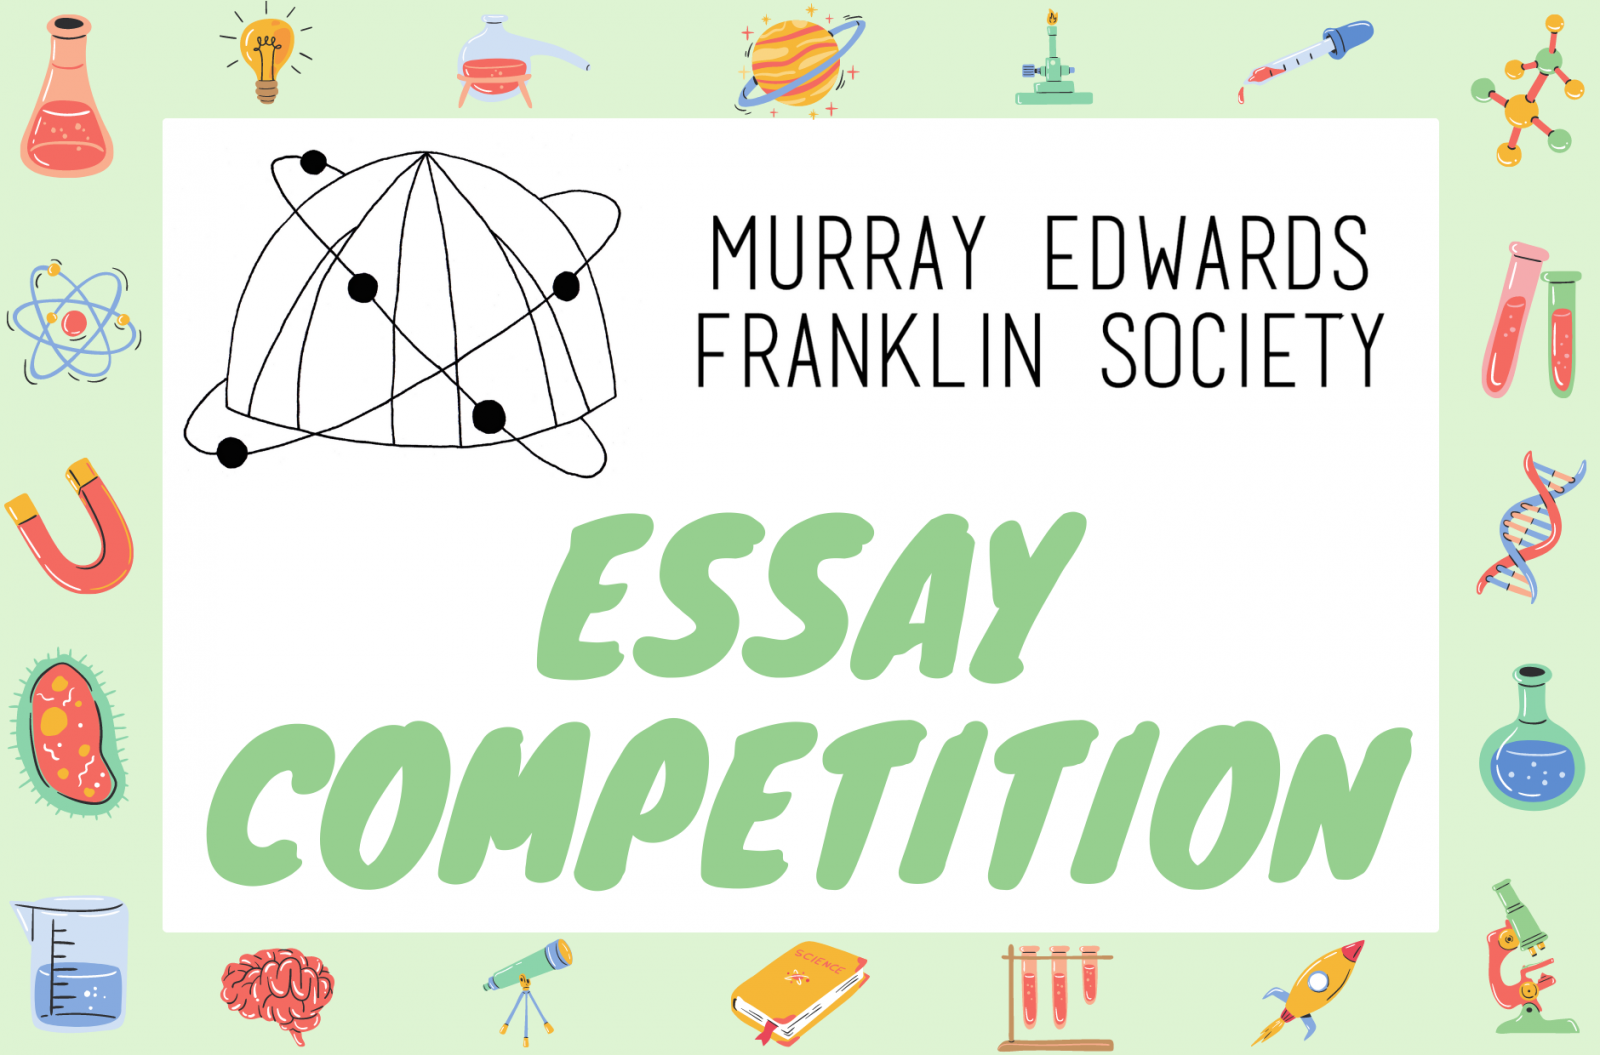 Franklin Society essay competition poster